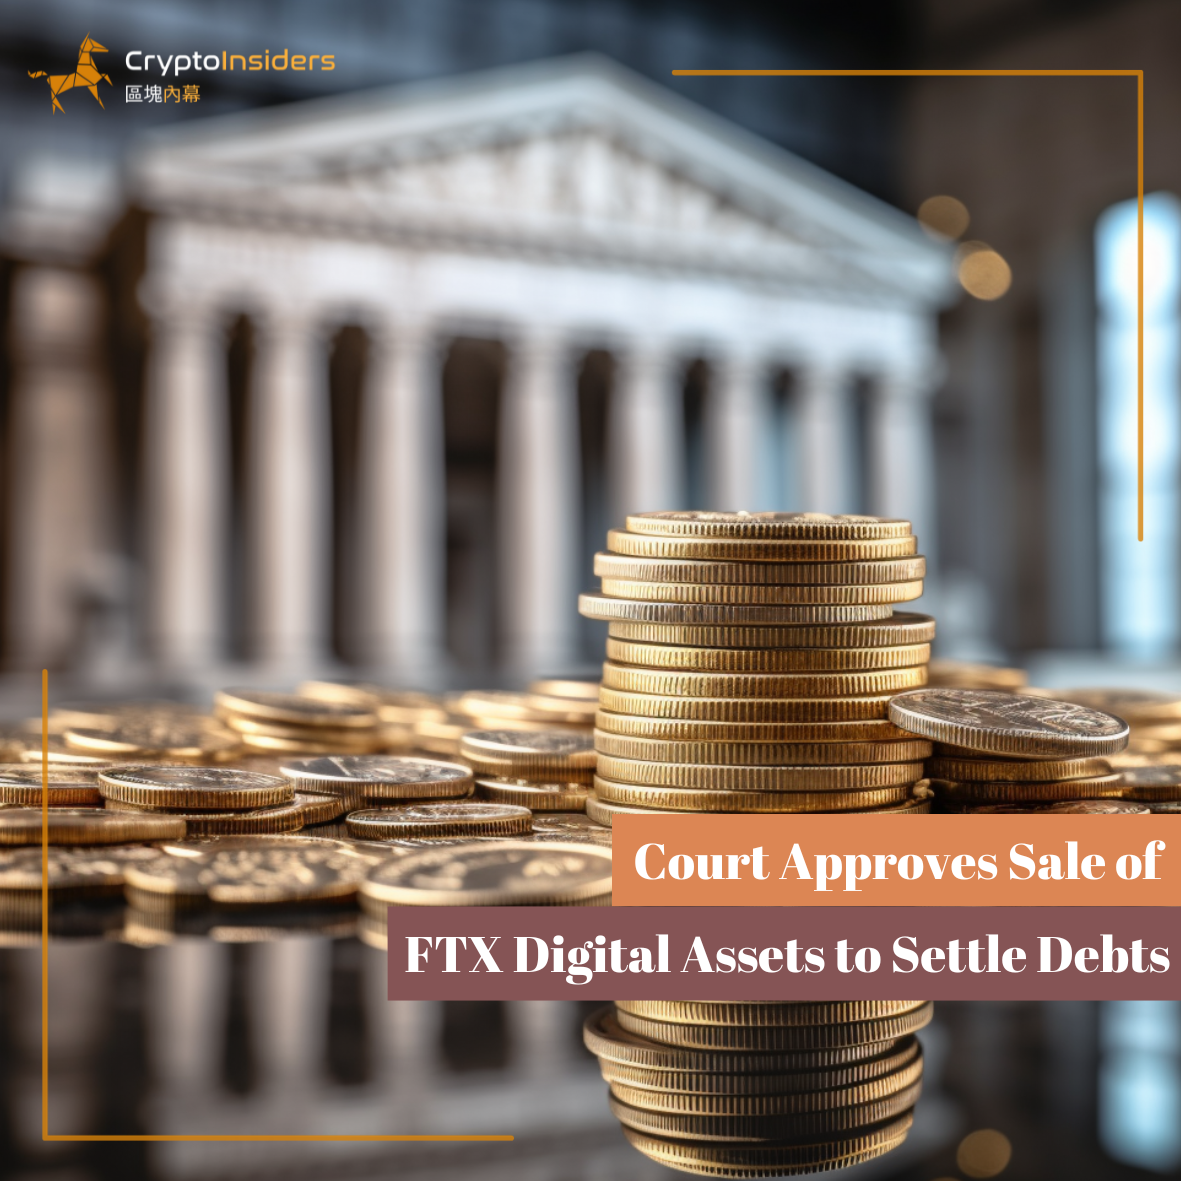 Court-Approves-Sale-of-FTX-Digital-Assets-to-Settle-Debts-Crypto-Insiders-Hong-Kong-Blockchain-News